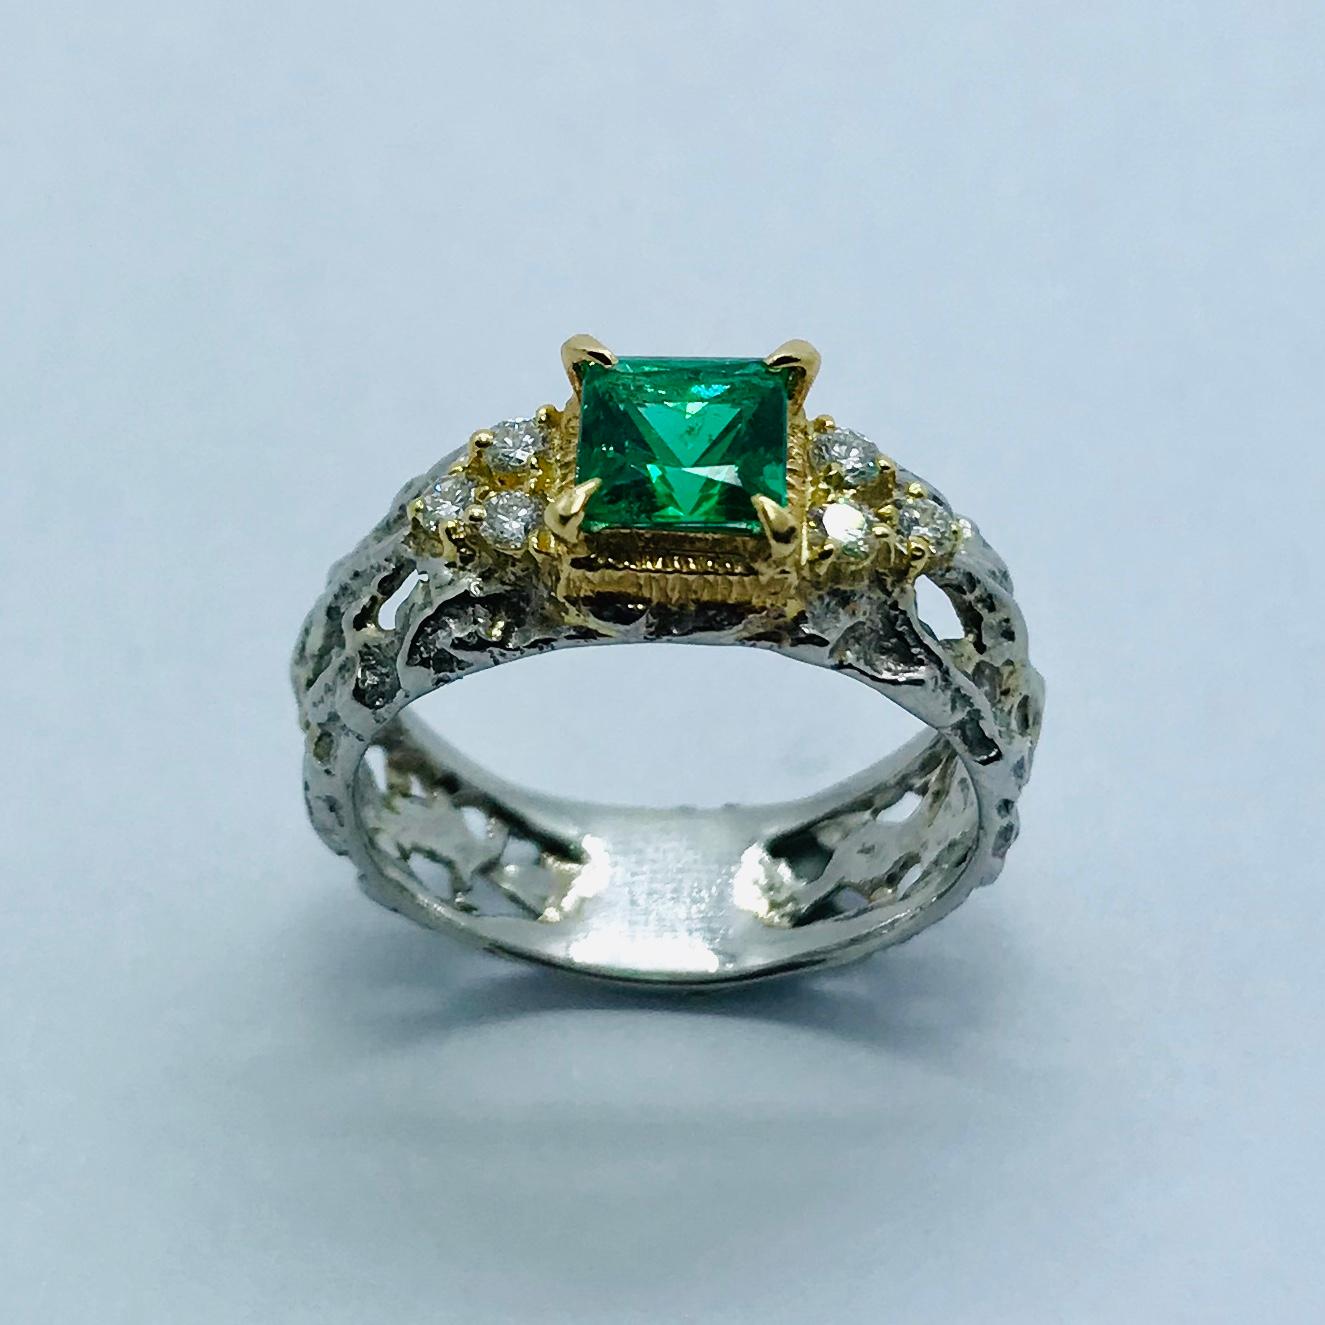 All buyers outside of Japan will receive -10% tax exemption from the list price. 
Please inquire for details.
Emerald : 0.75ct / Diamonds : 0.17ct
Approximate Size of the center stone : L5.6mm W5.4mm
Size: #12.5 US6.5 EU52.5
Unique Piece / Brand New